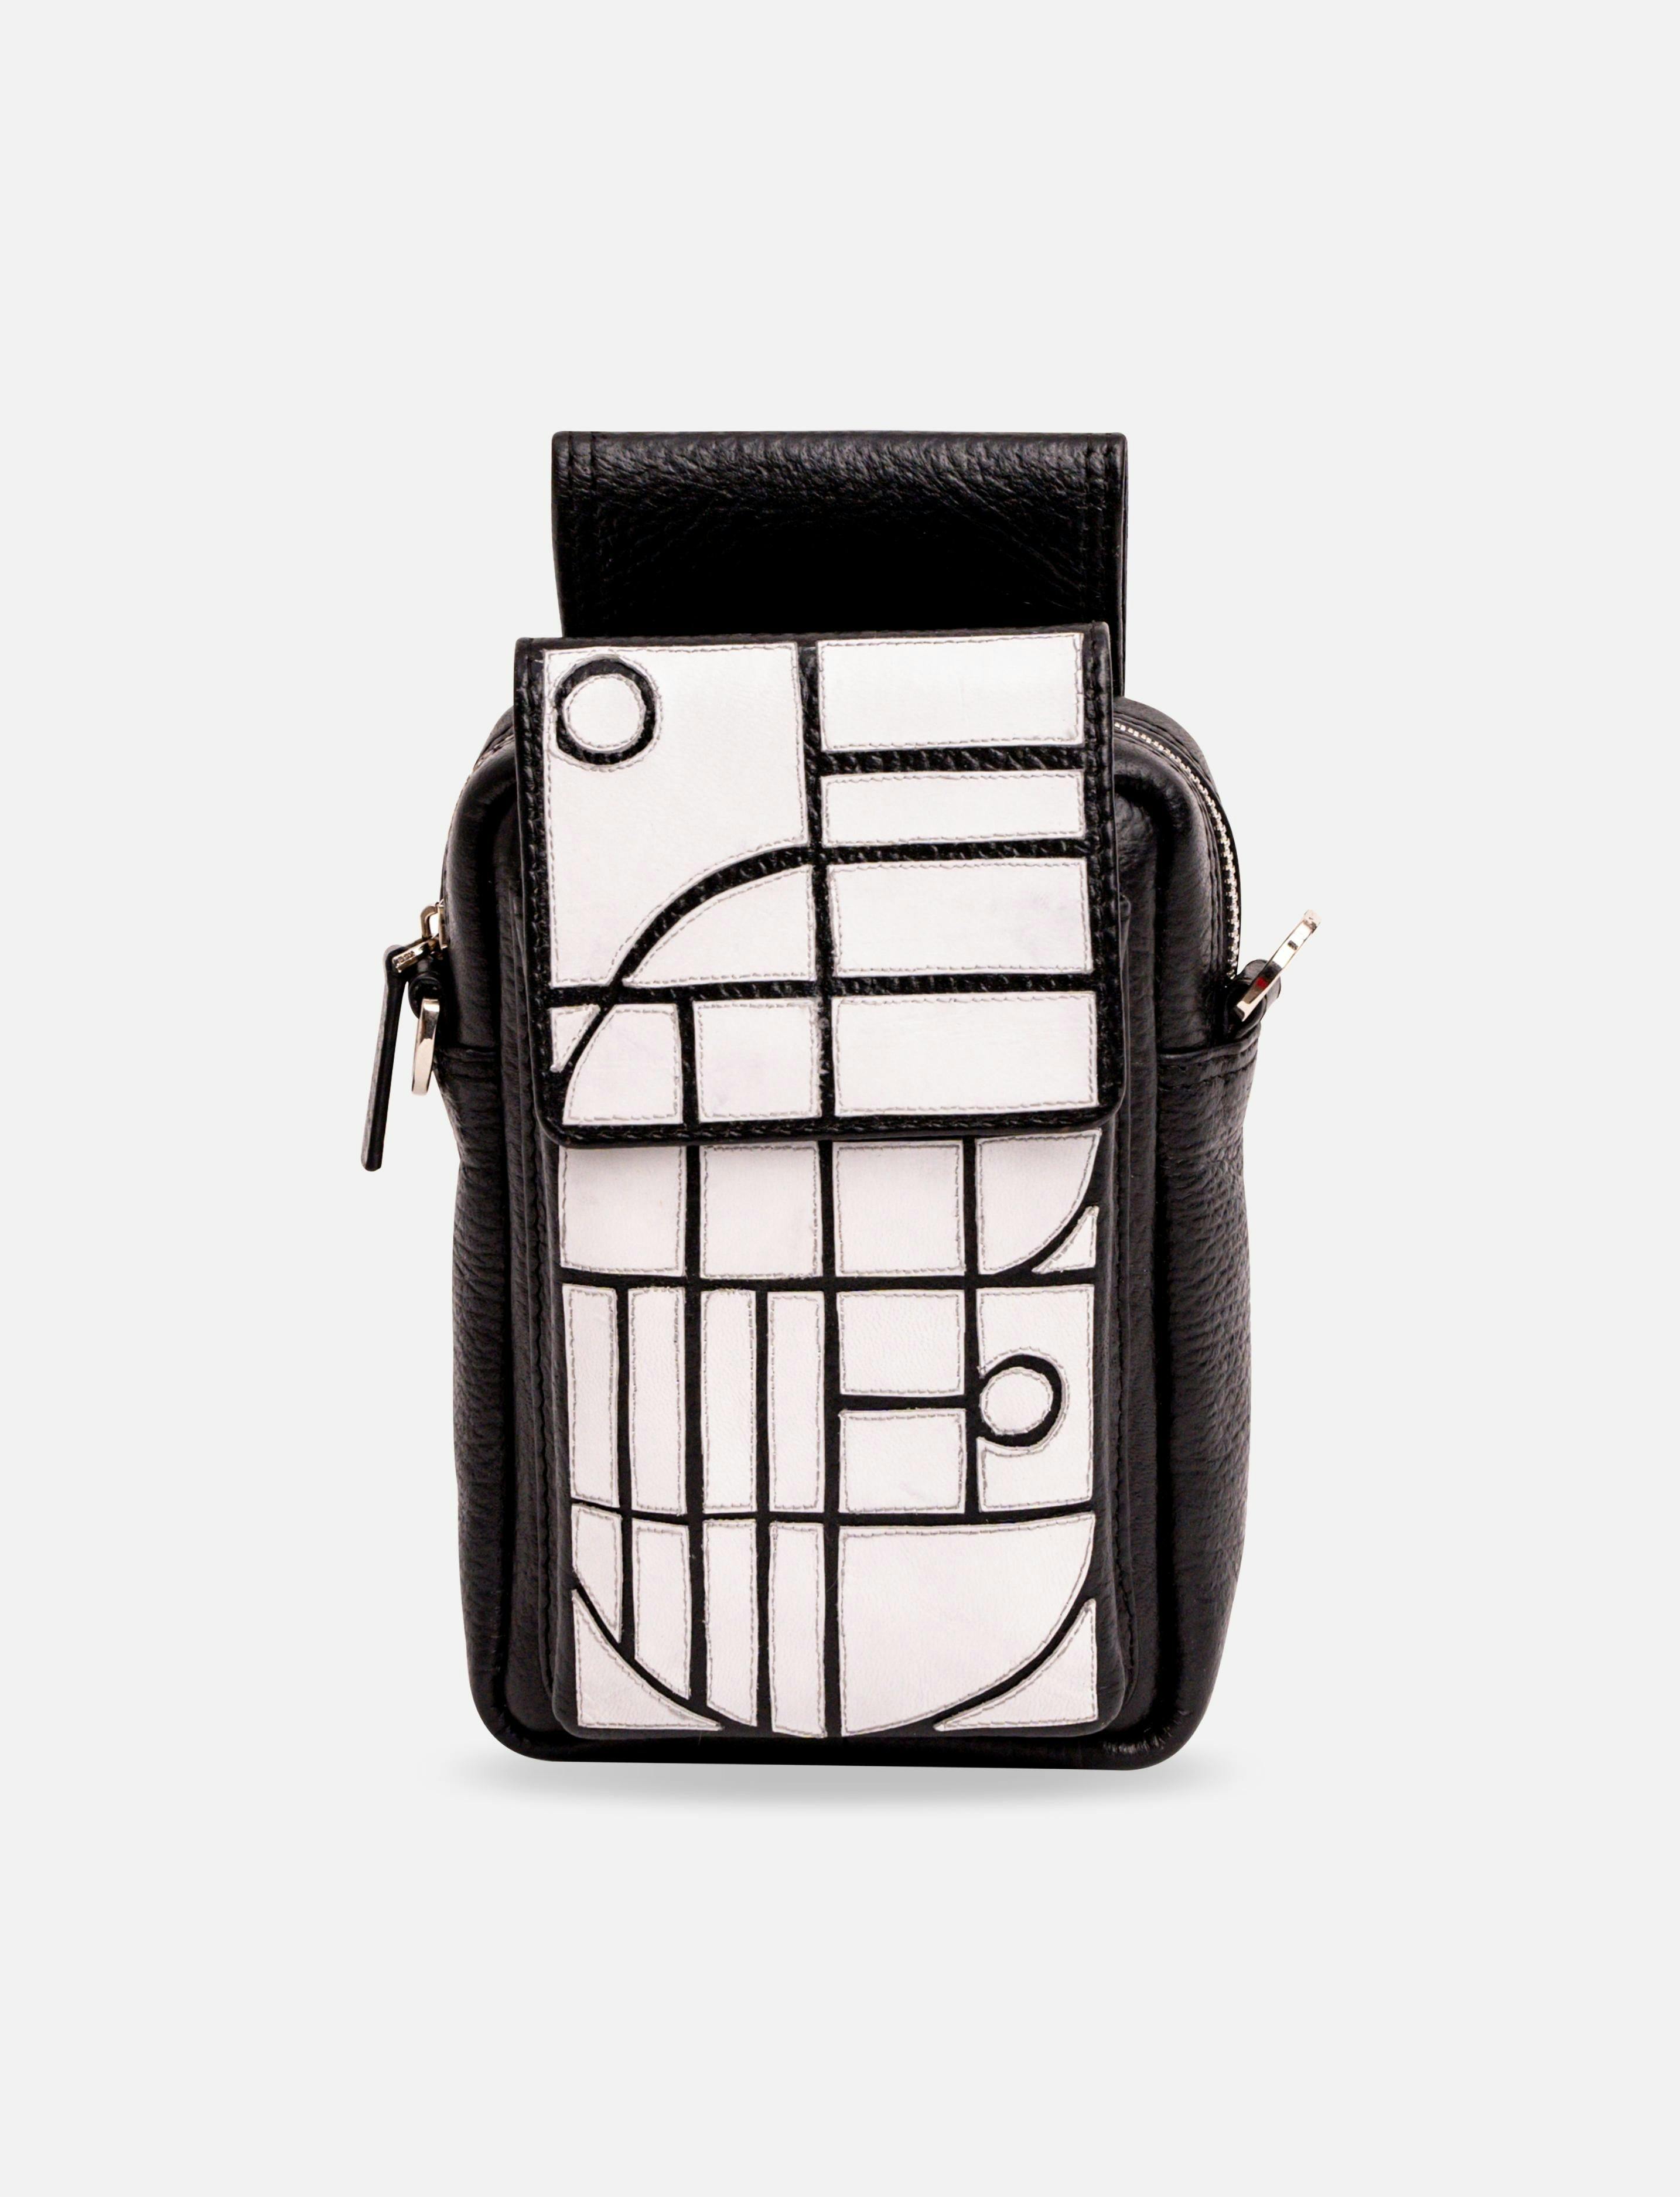 Saveur Phone Bag, a product by Econock